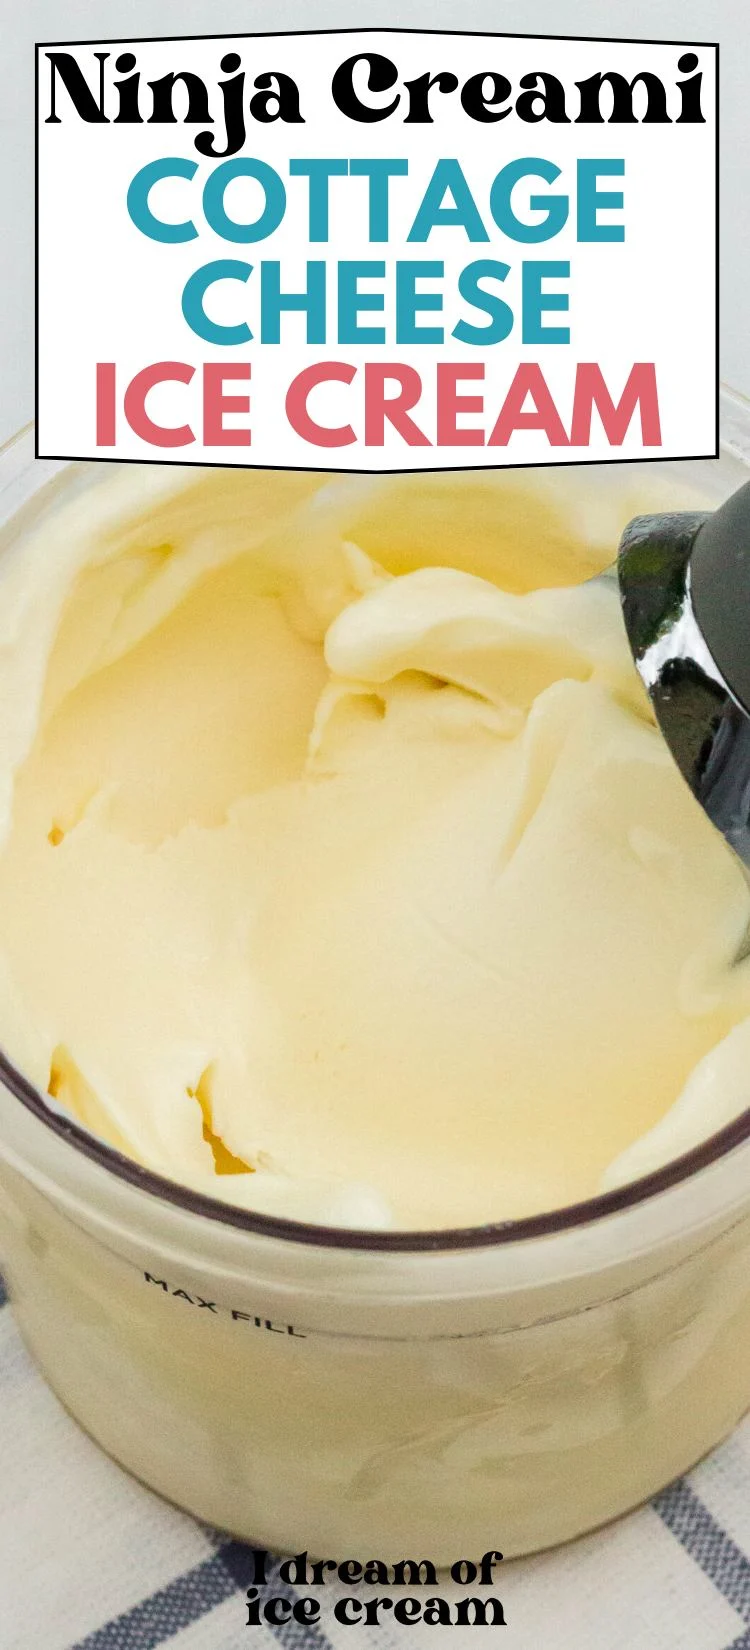 close-up view of a Ninja Creami pint of cottage cheese ice cream.